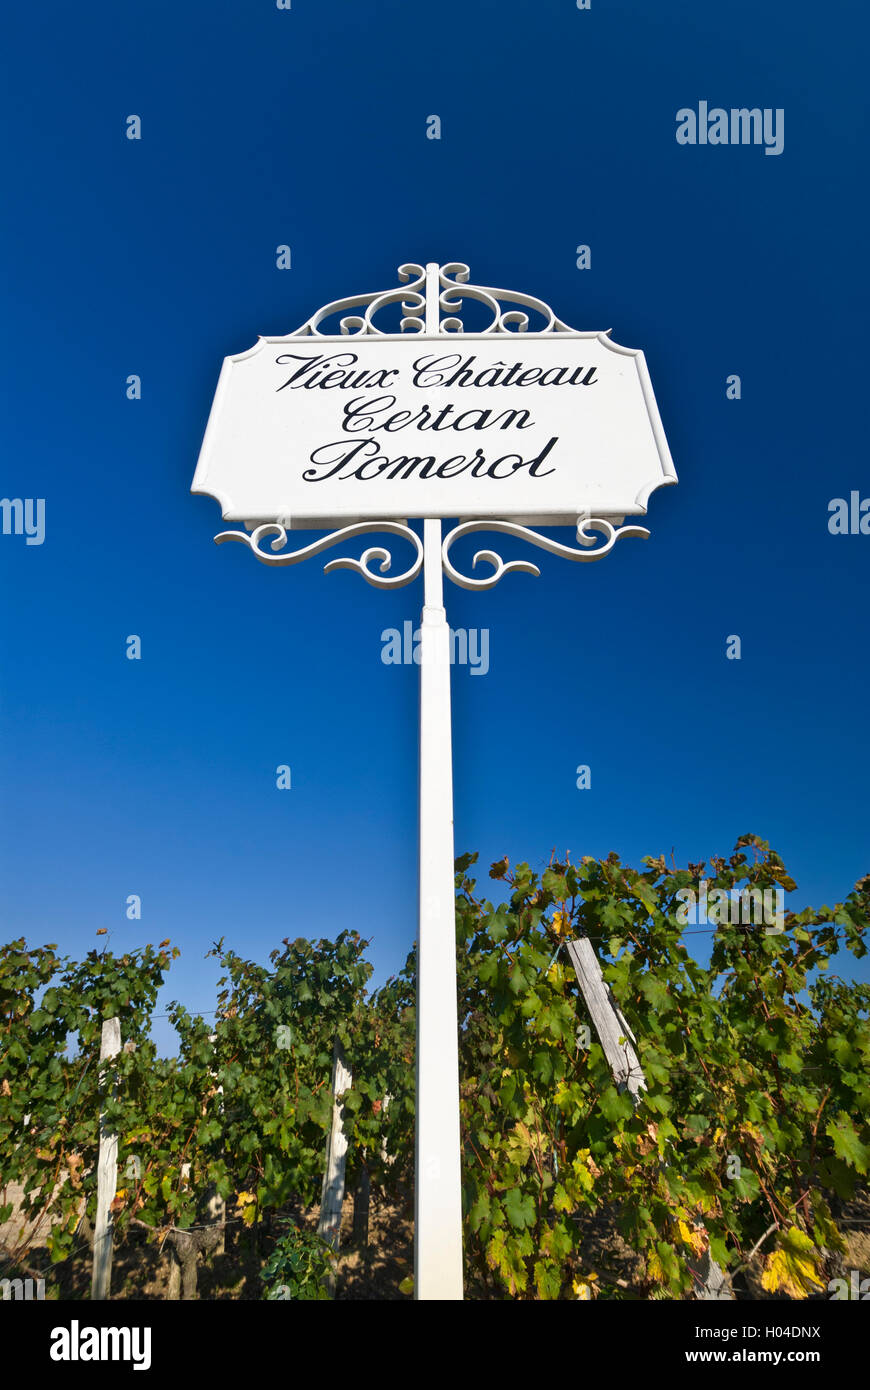 Ornate metal sign at vineyard boundary to Vieux Chateau Certan Pomerol Bordeaux France Stock Photo